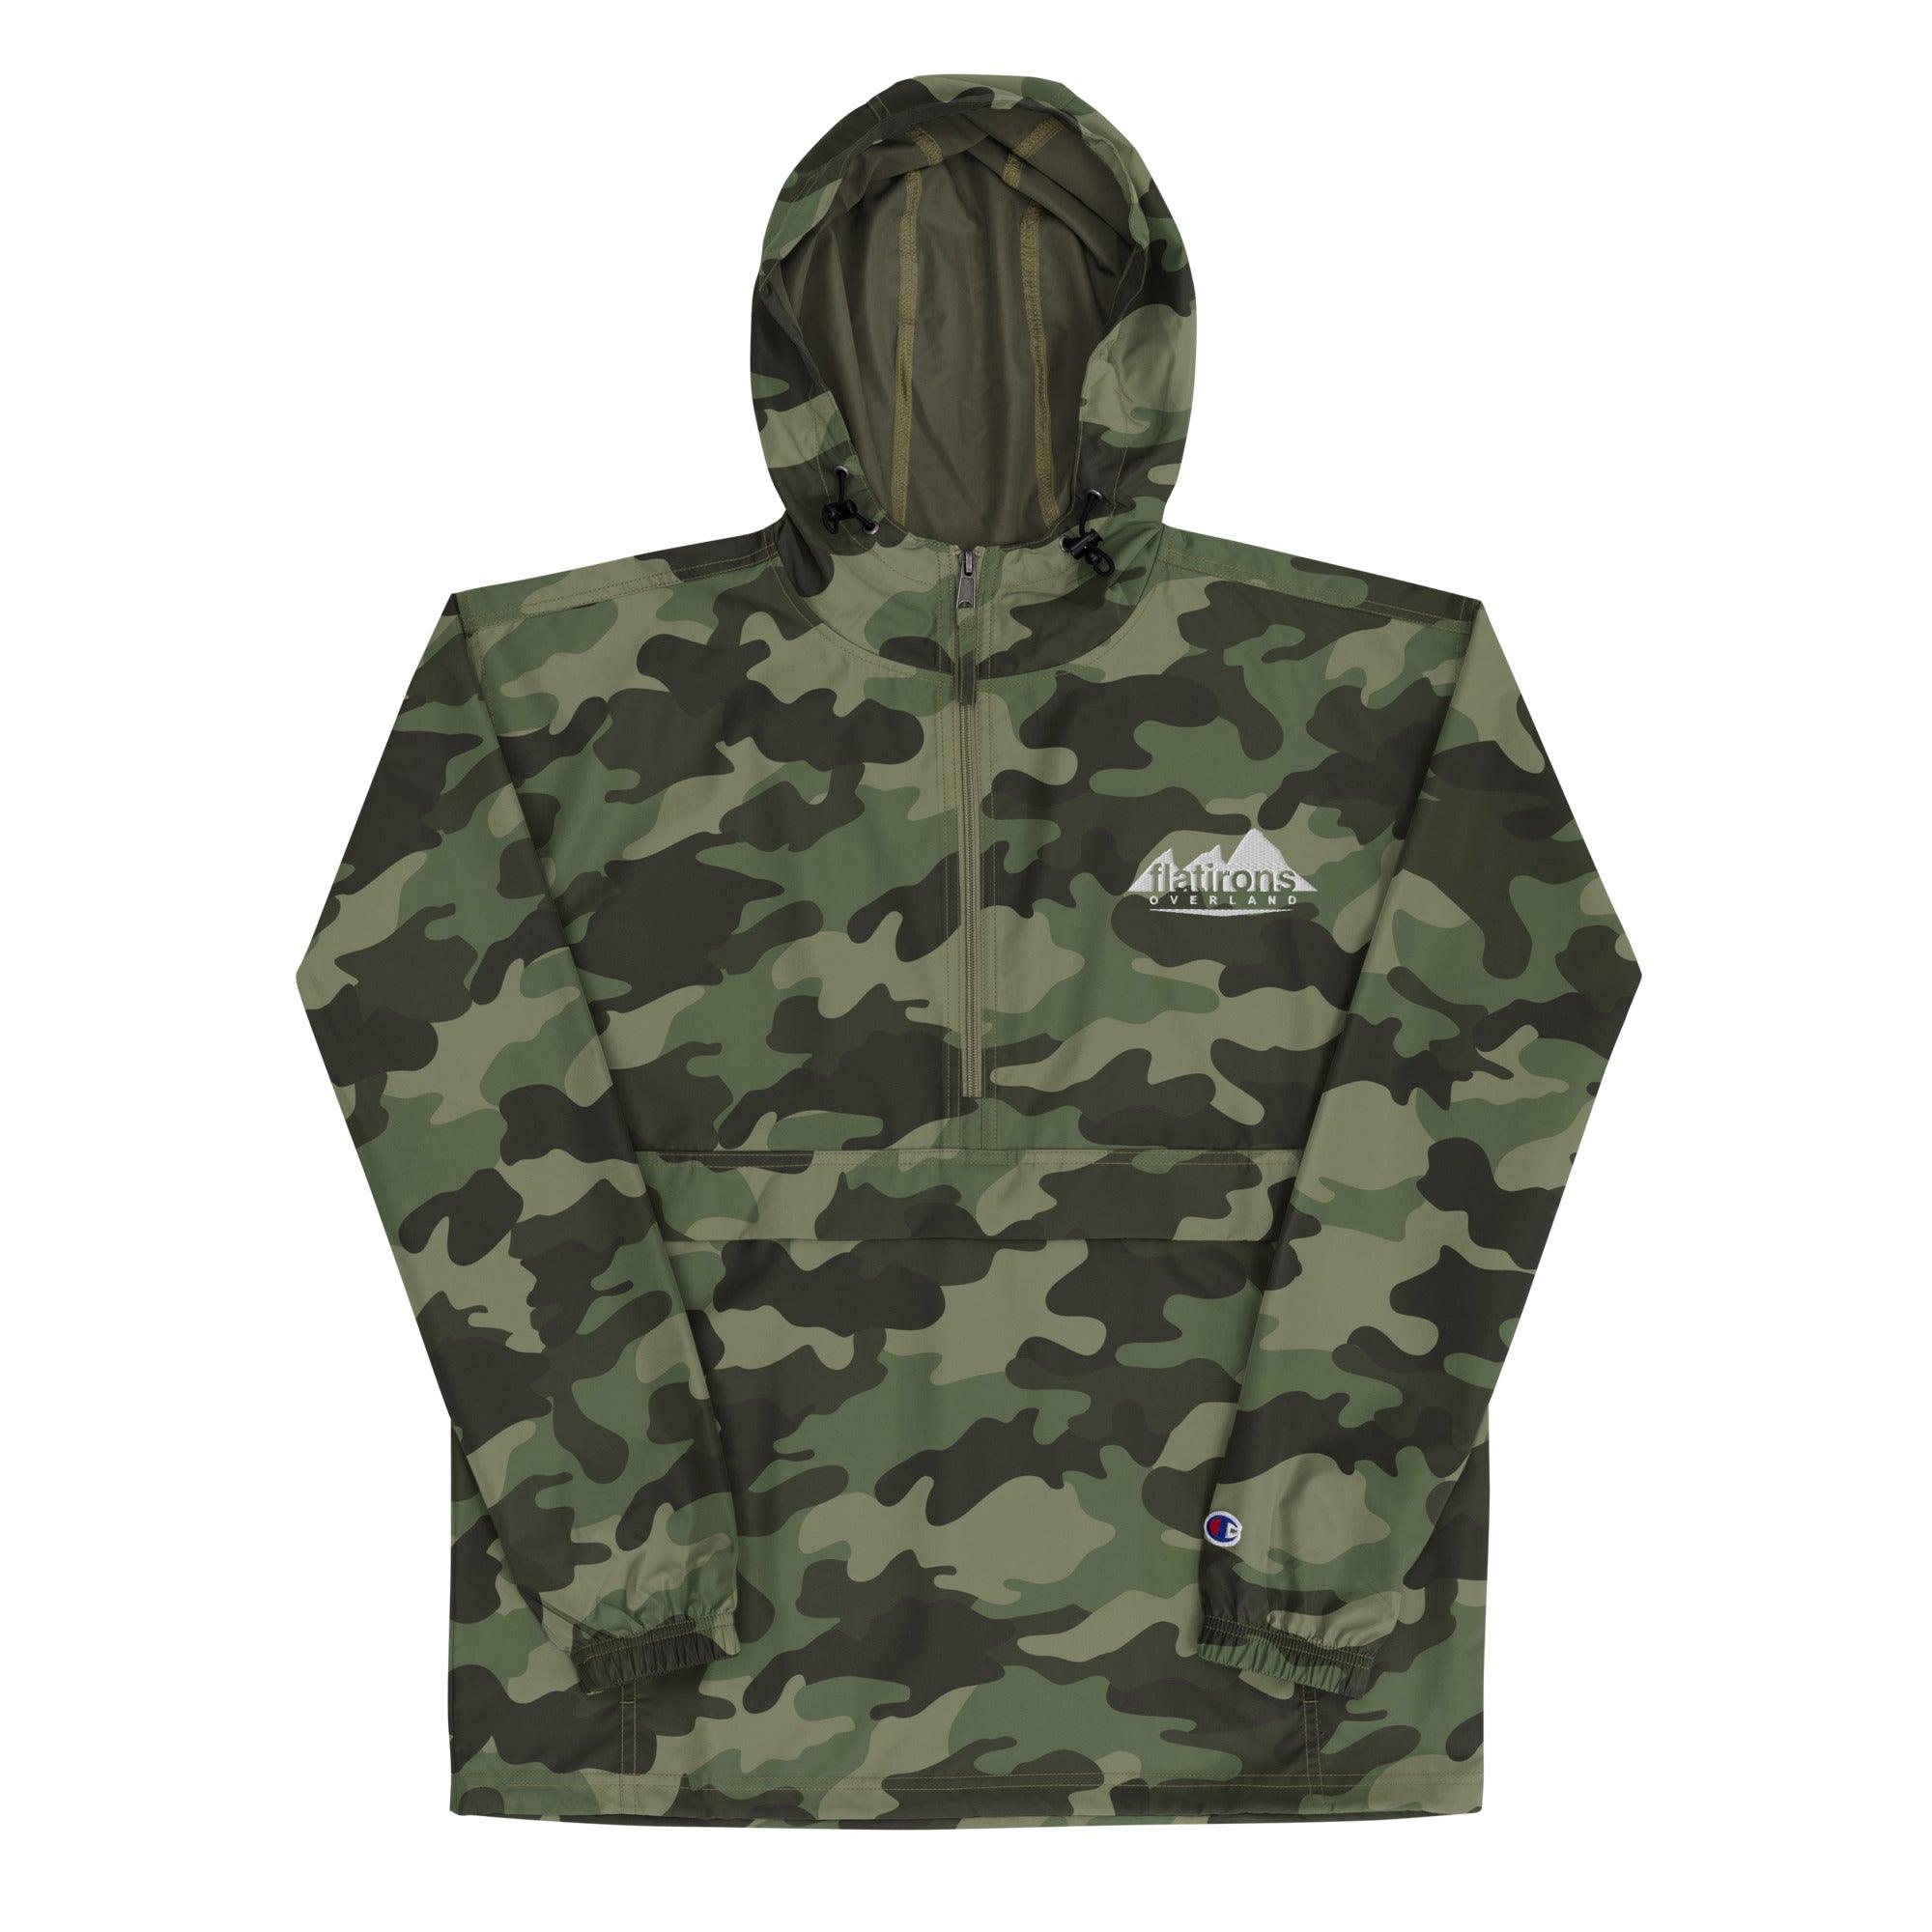 Embroidered Champion Packable Jacket - Flatirons Overland